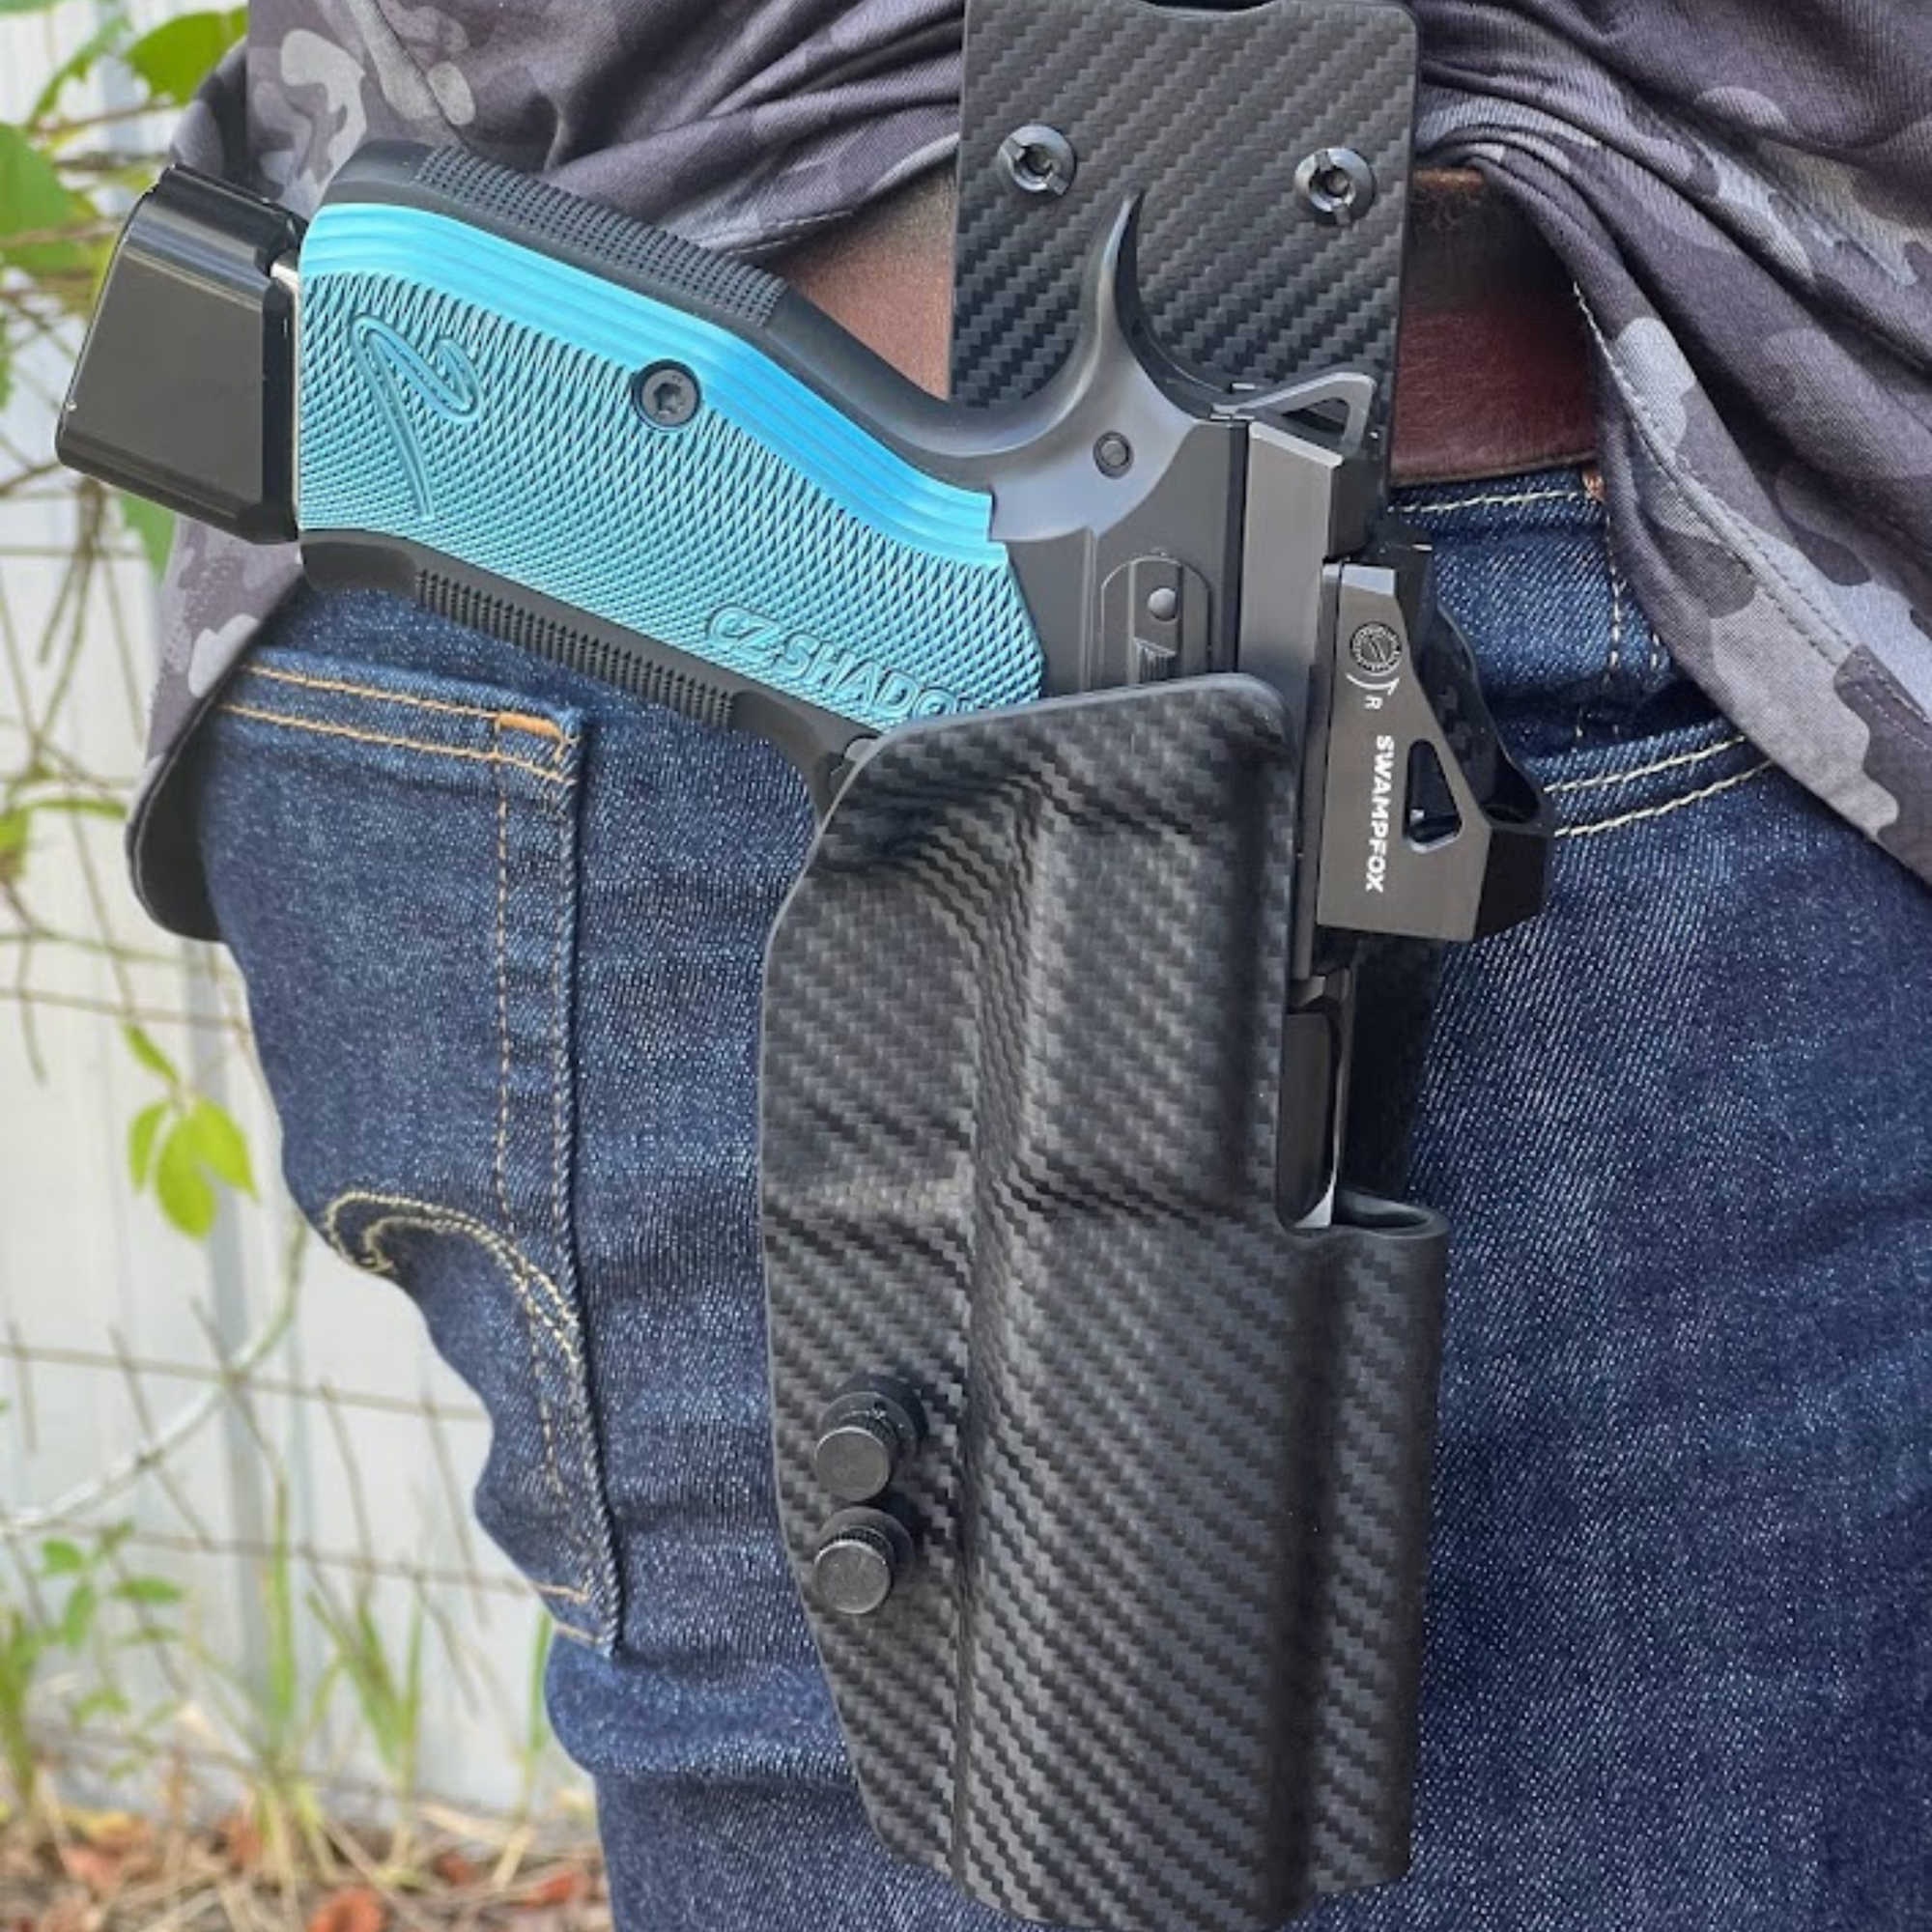 Rounded by Concealment Express Holster Reviews 